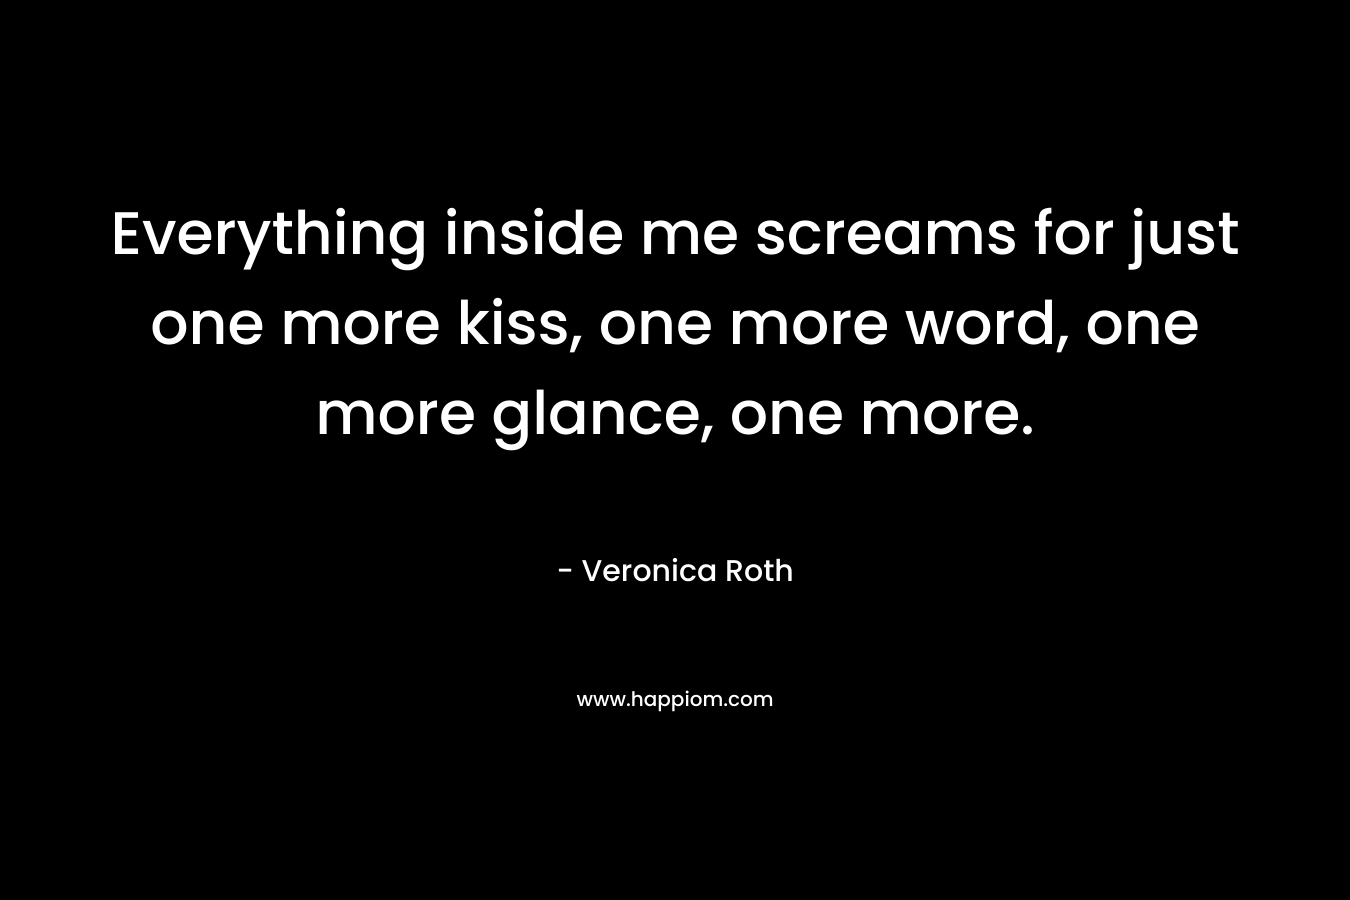 Everything inside me screams for just one more kiss, one more word, one more glance, one more. – Veronica Roth